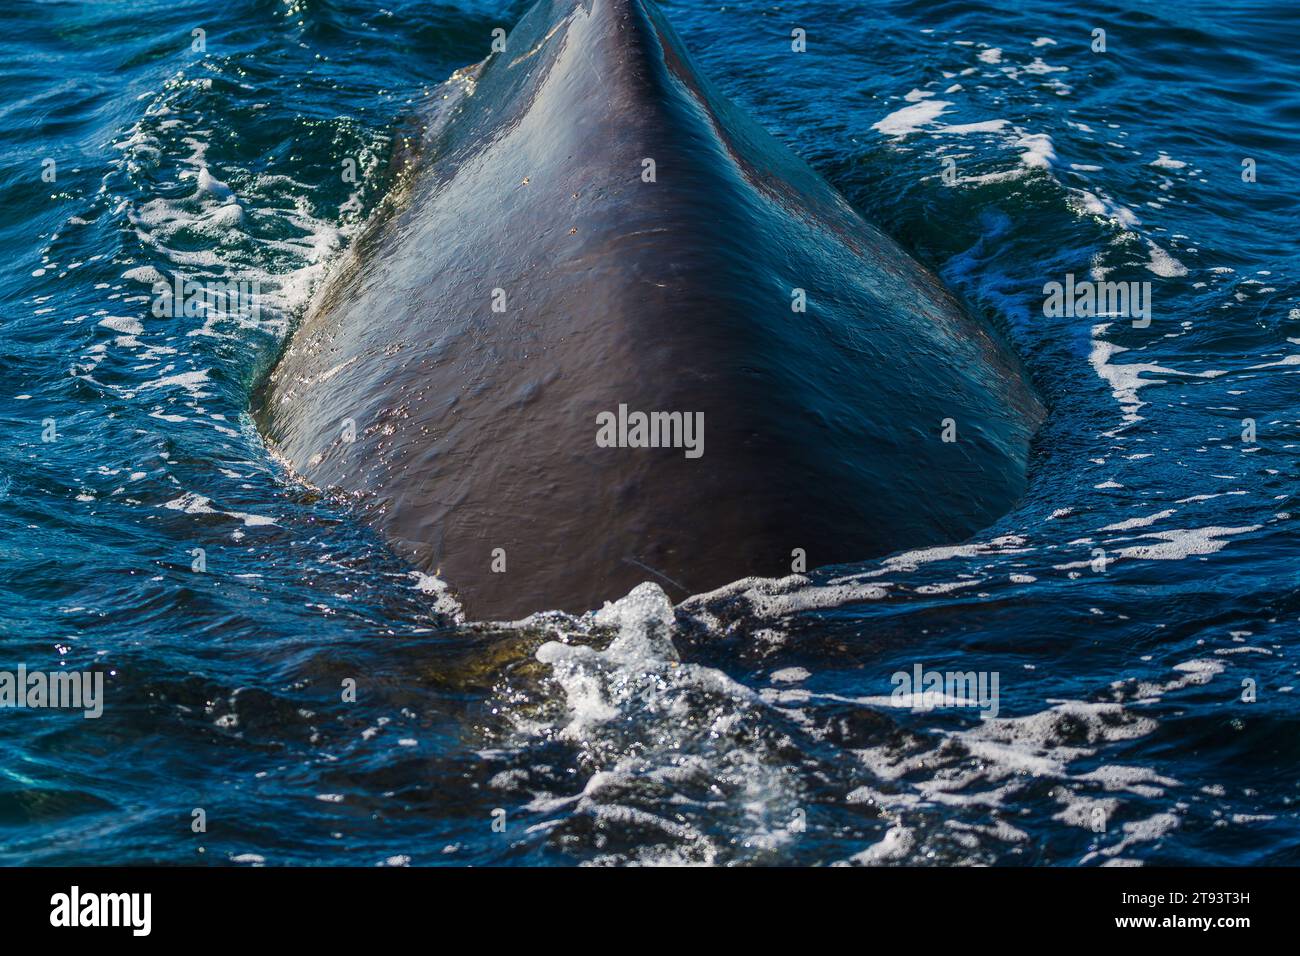 Close-up view of adult Hump Back Whale Stock Photo